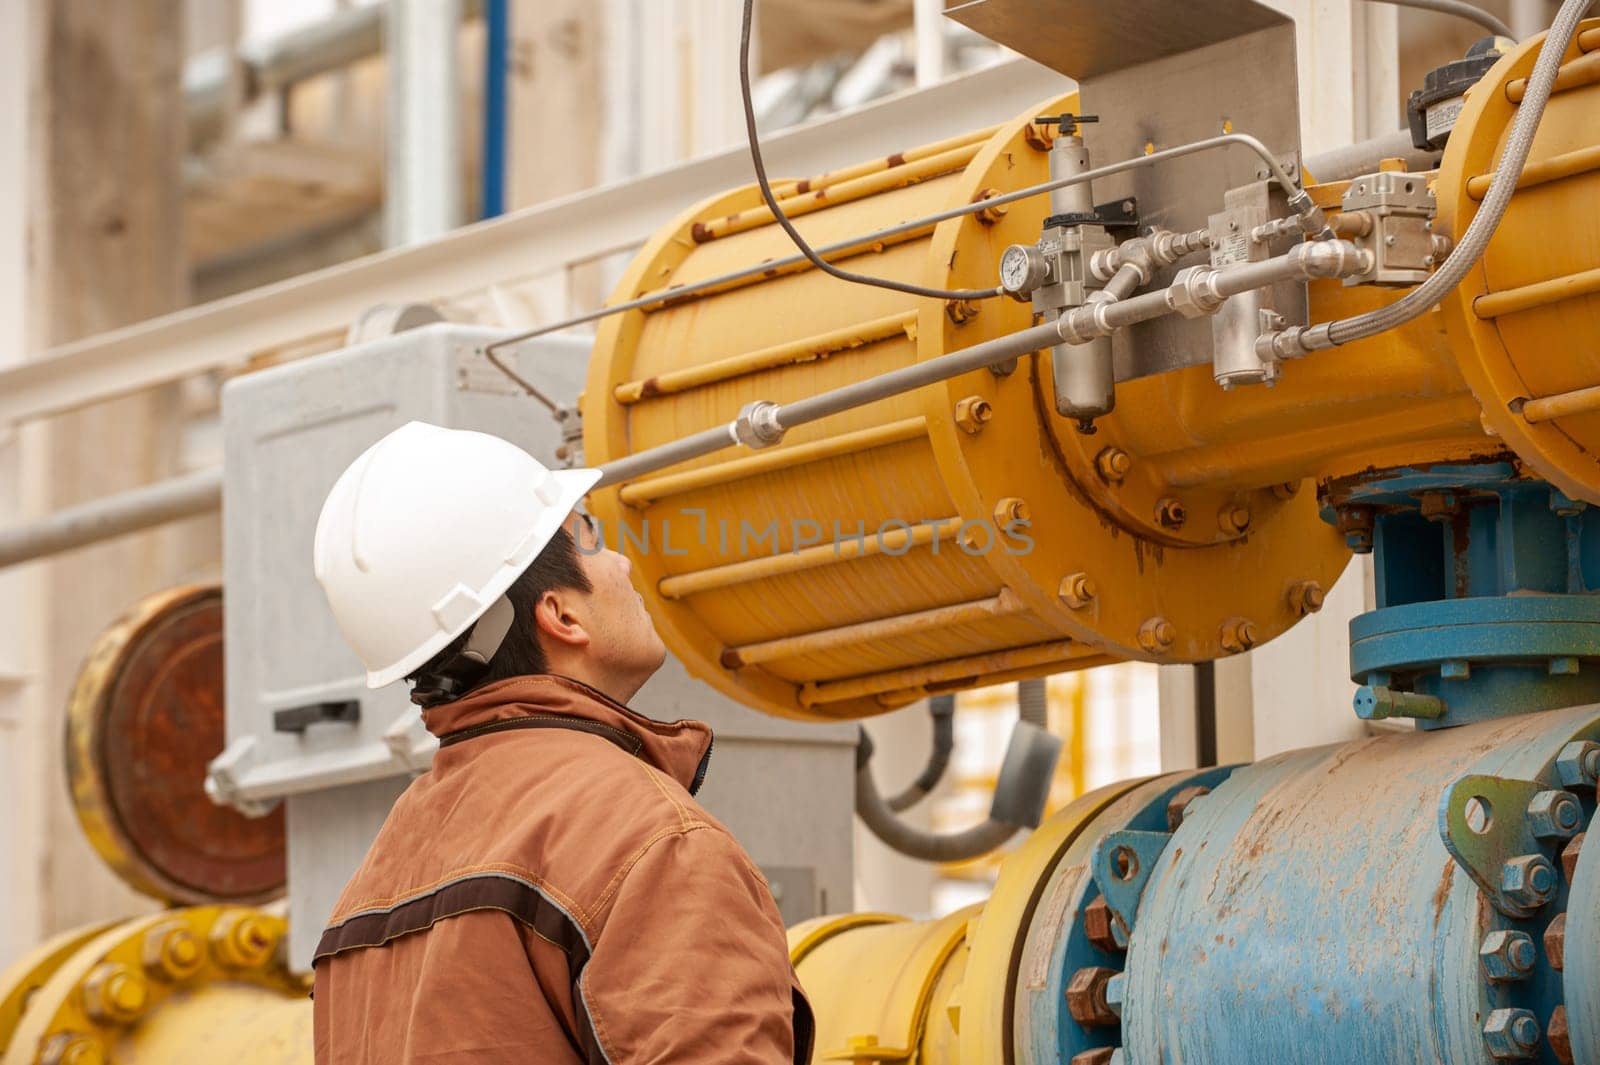 A close-up of a worker observing the indicators on an industrial pump. Oil and gas industry